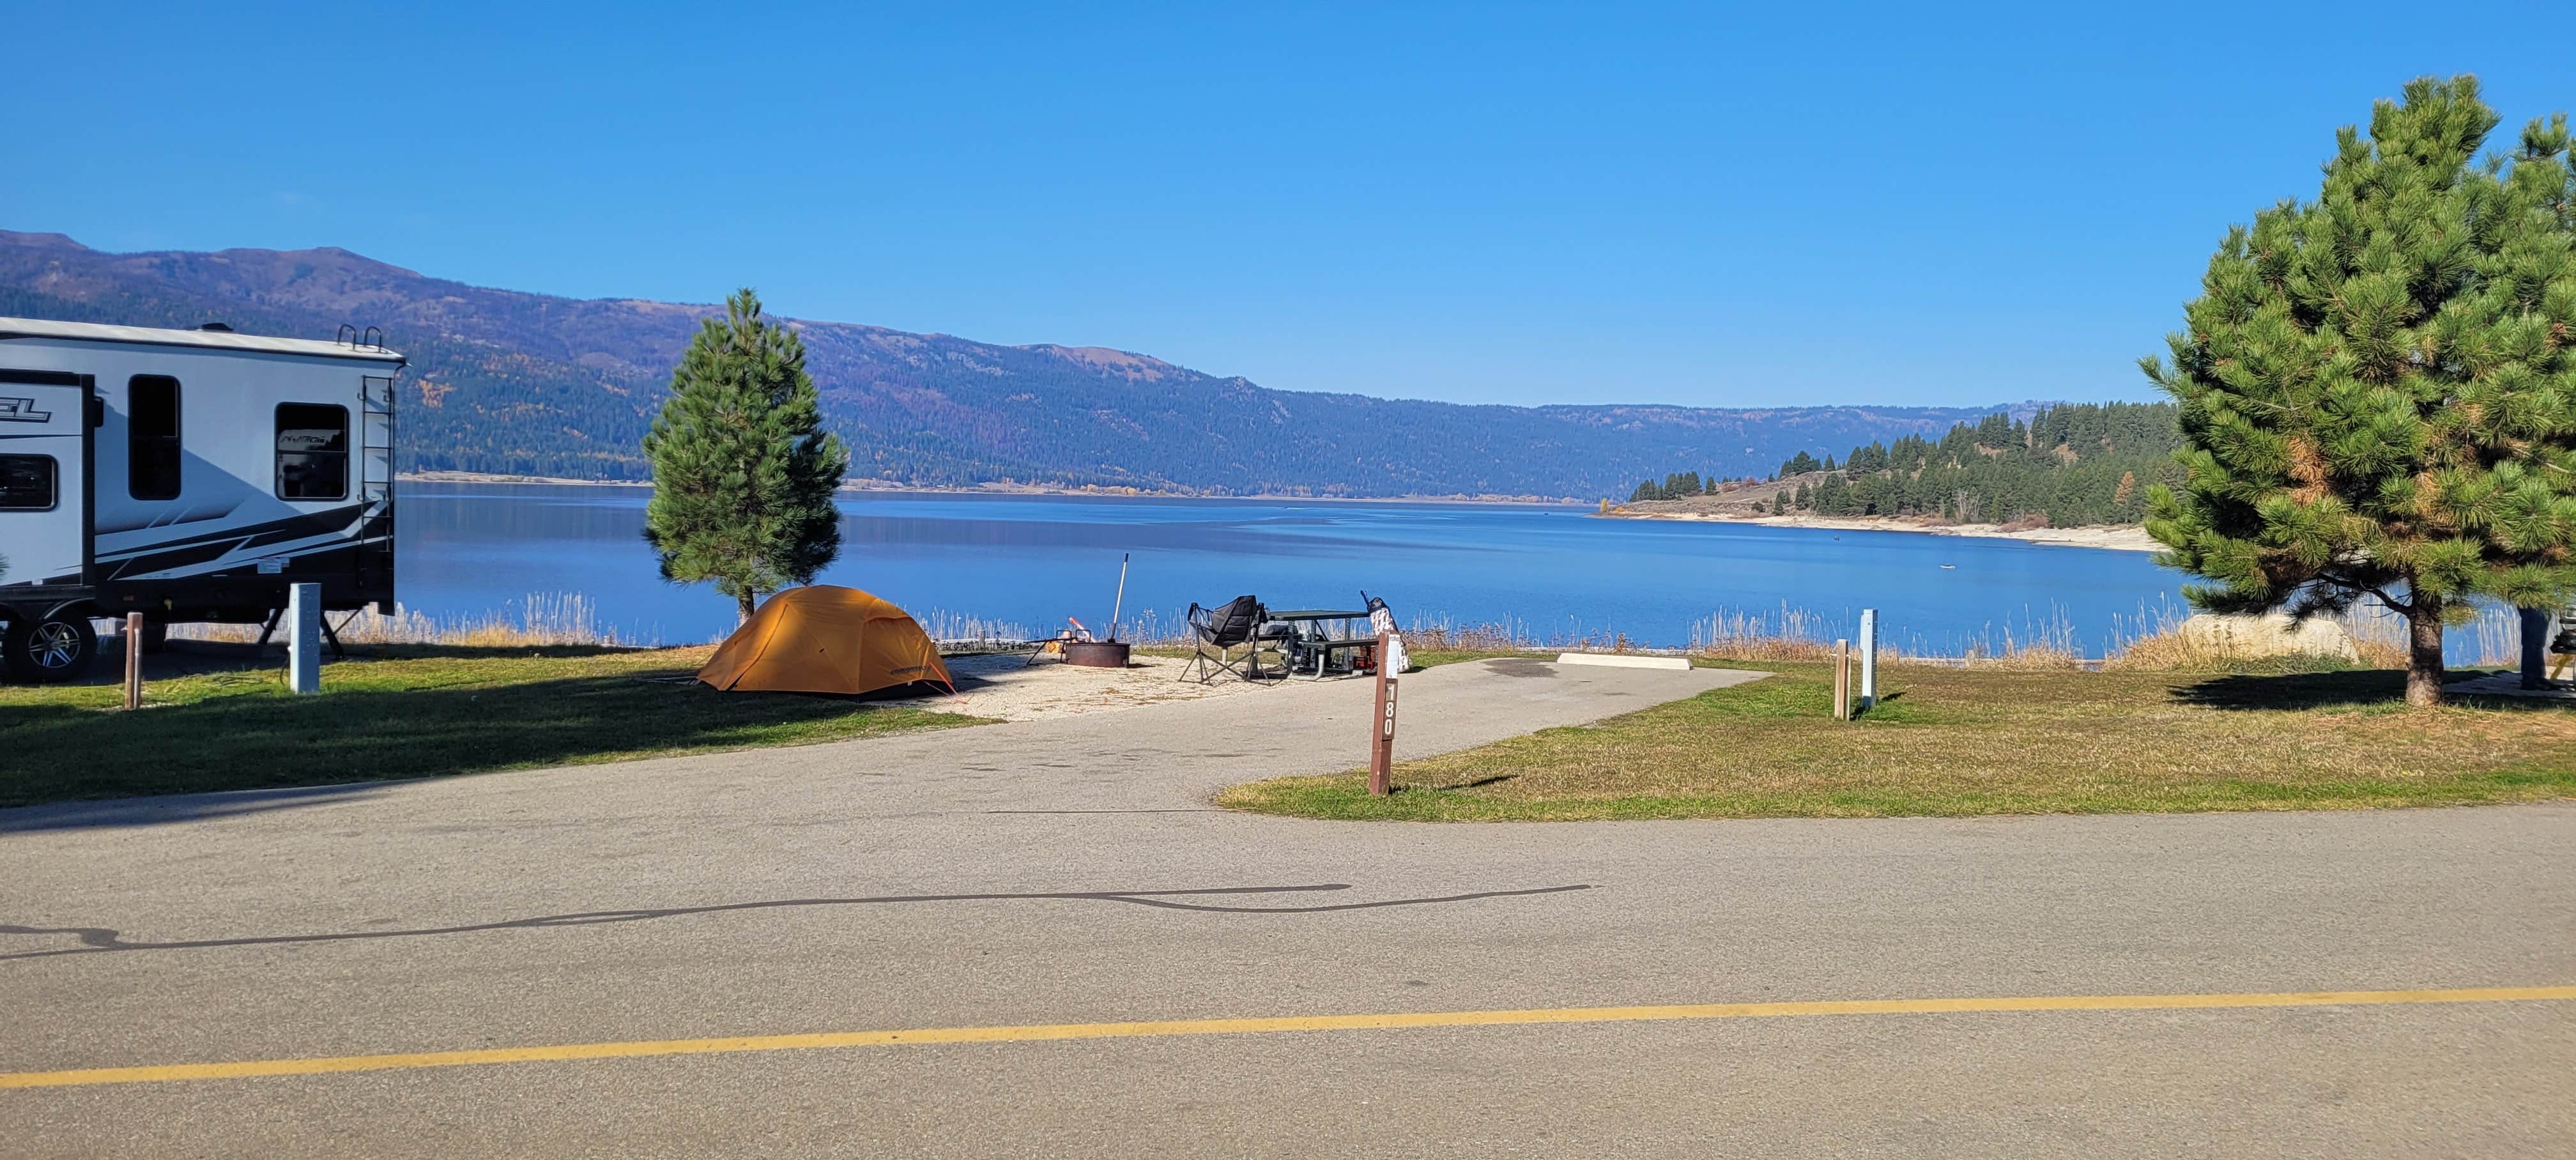 Camper submitted image from Hells Canyon Recreation Area - Woodhead Campground - 1